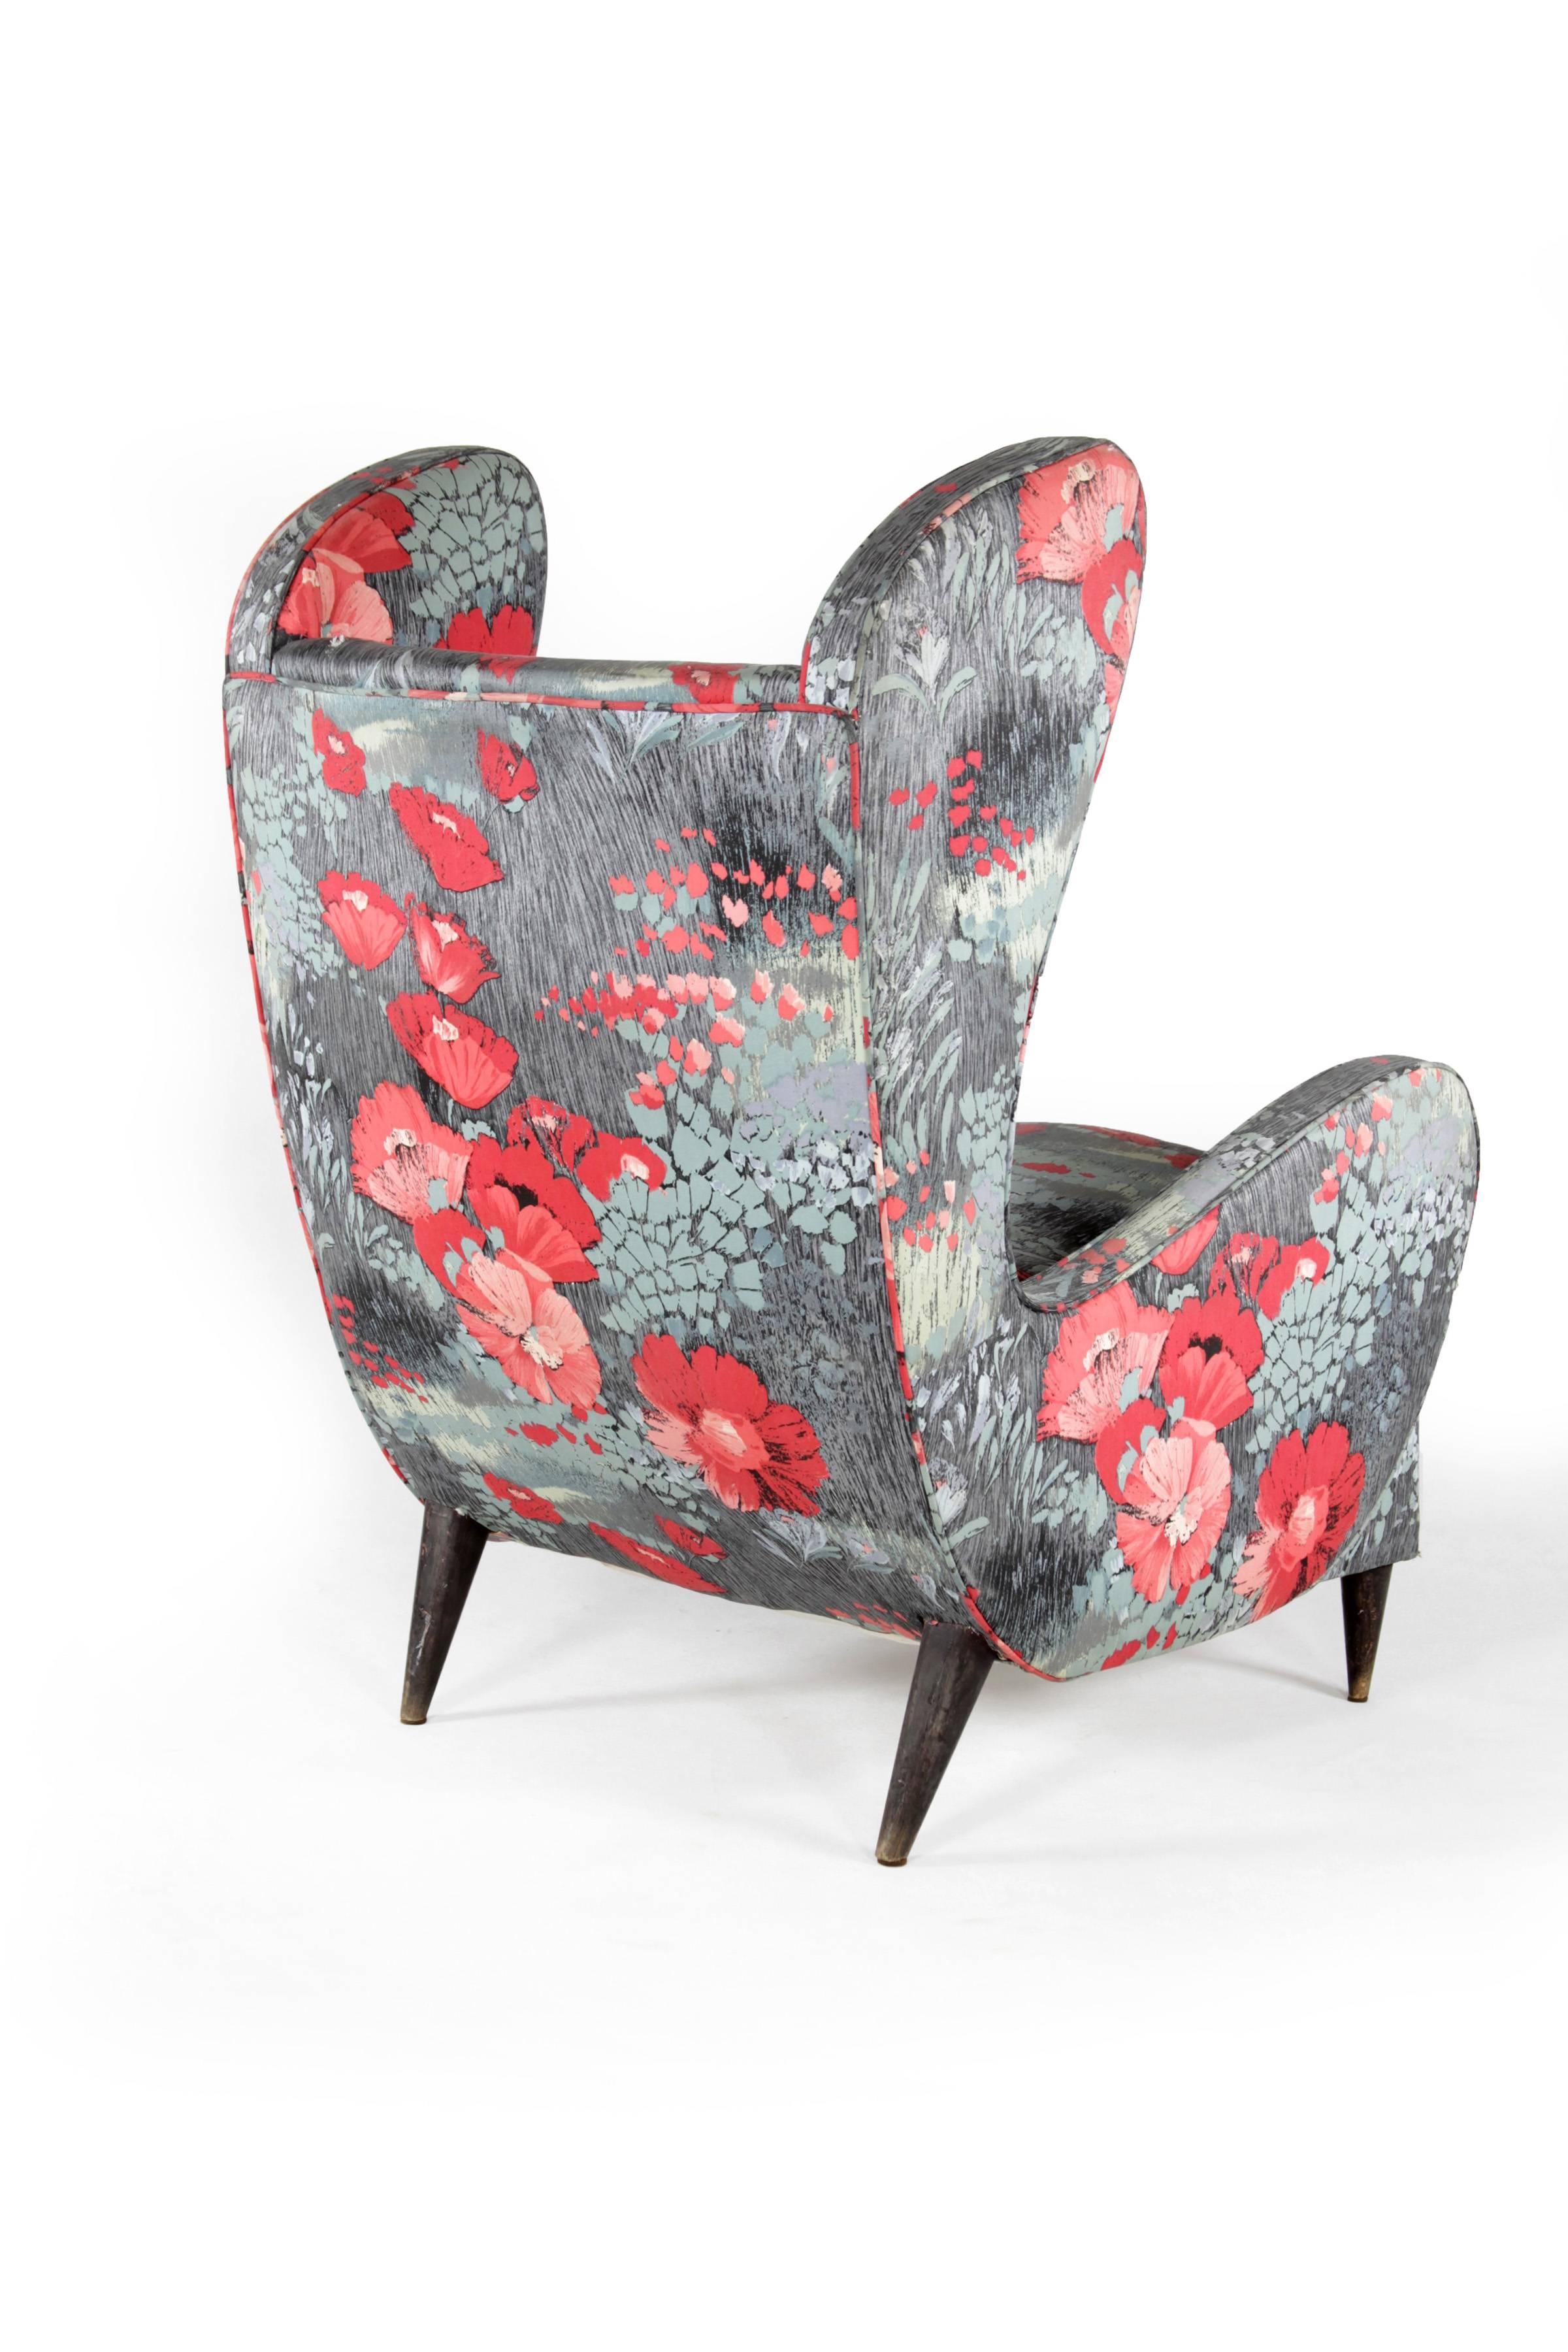 This wing chair was designed in Italy in the 1940s. The well-upholstered furniture body is covered with the extravagant and very striking original cover with floral motif. The armchair is in good original vintage condition.

Do not hesitate to